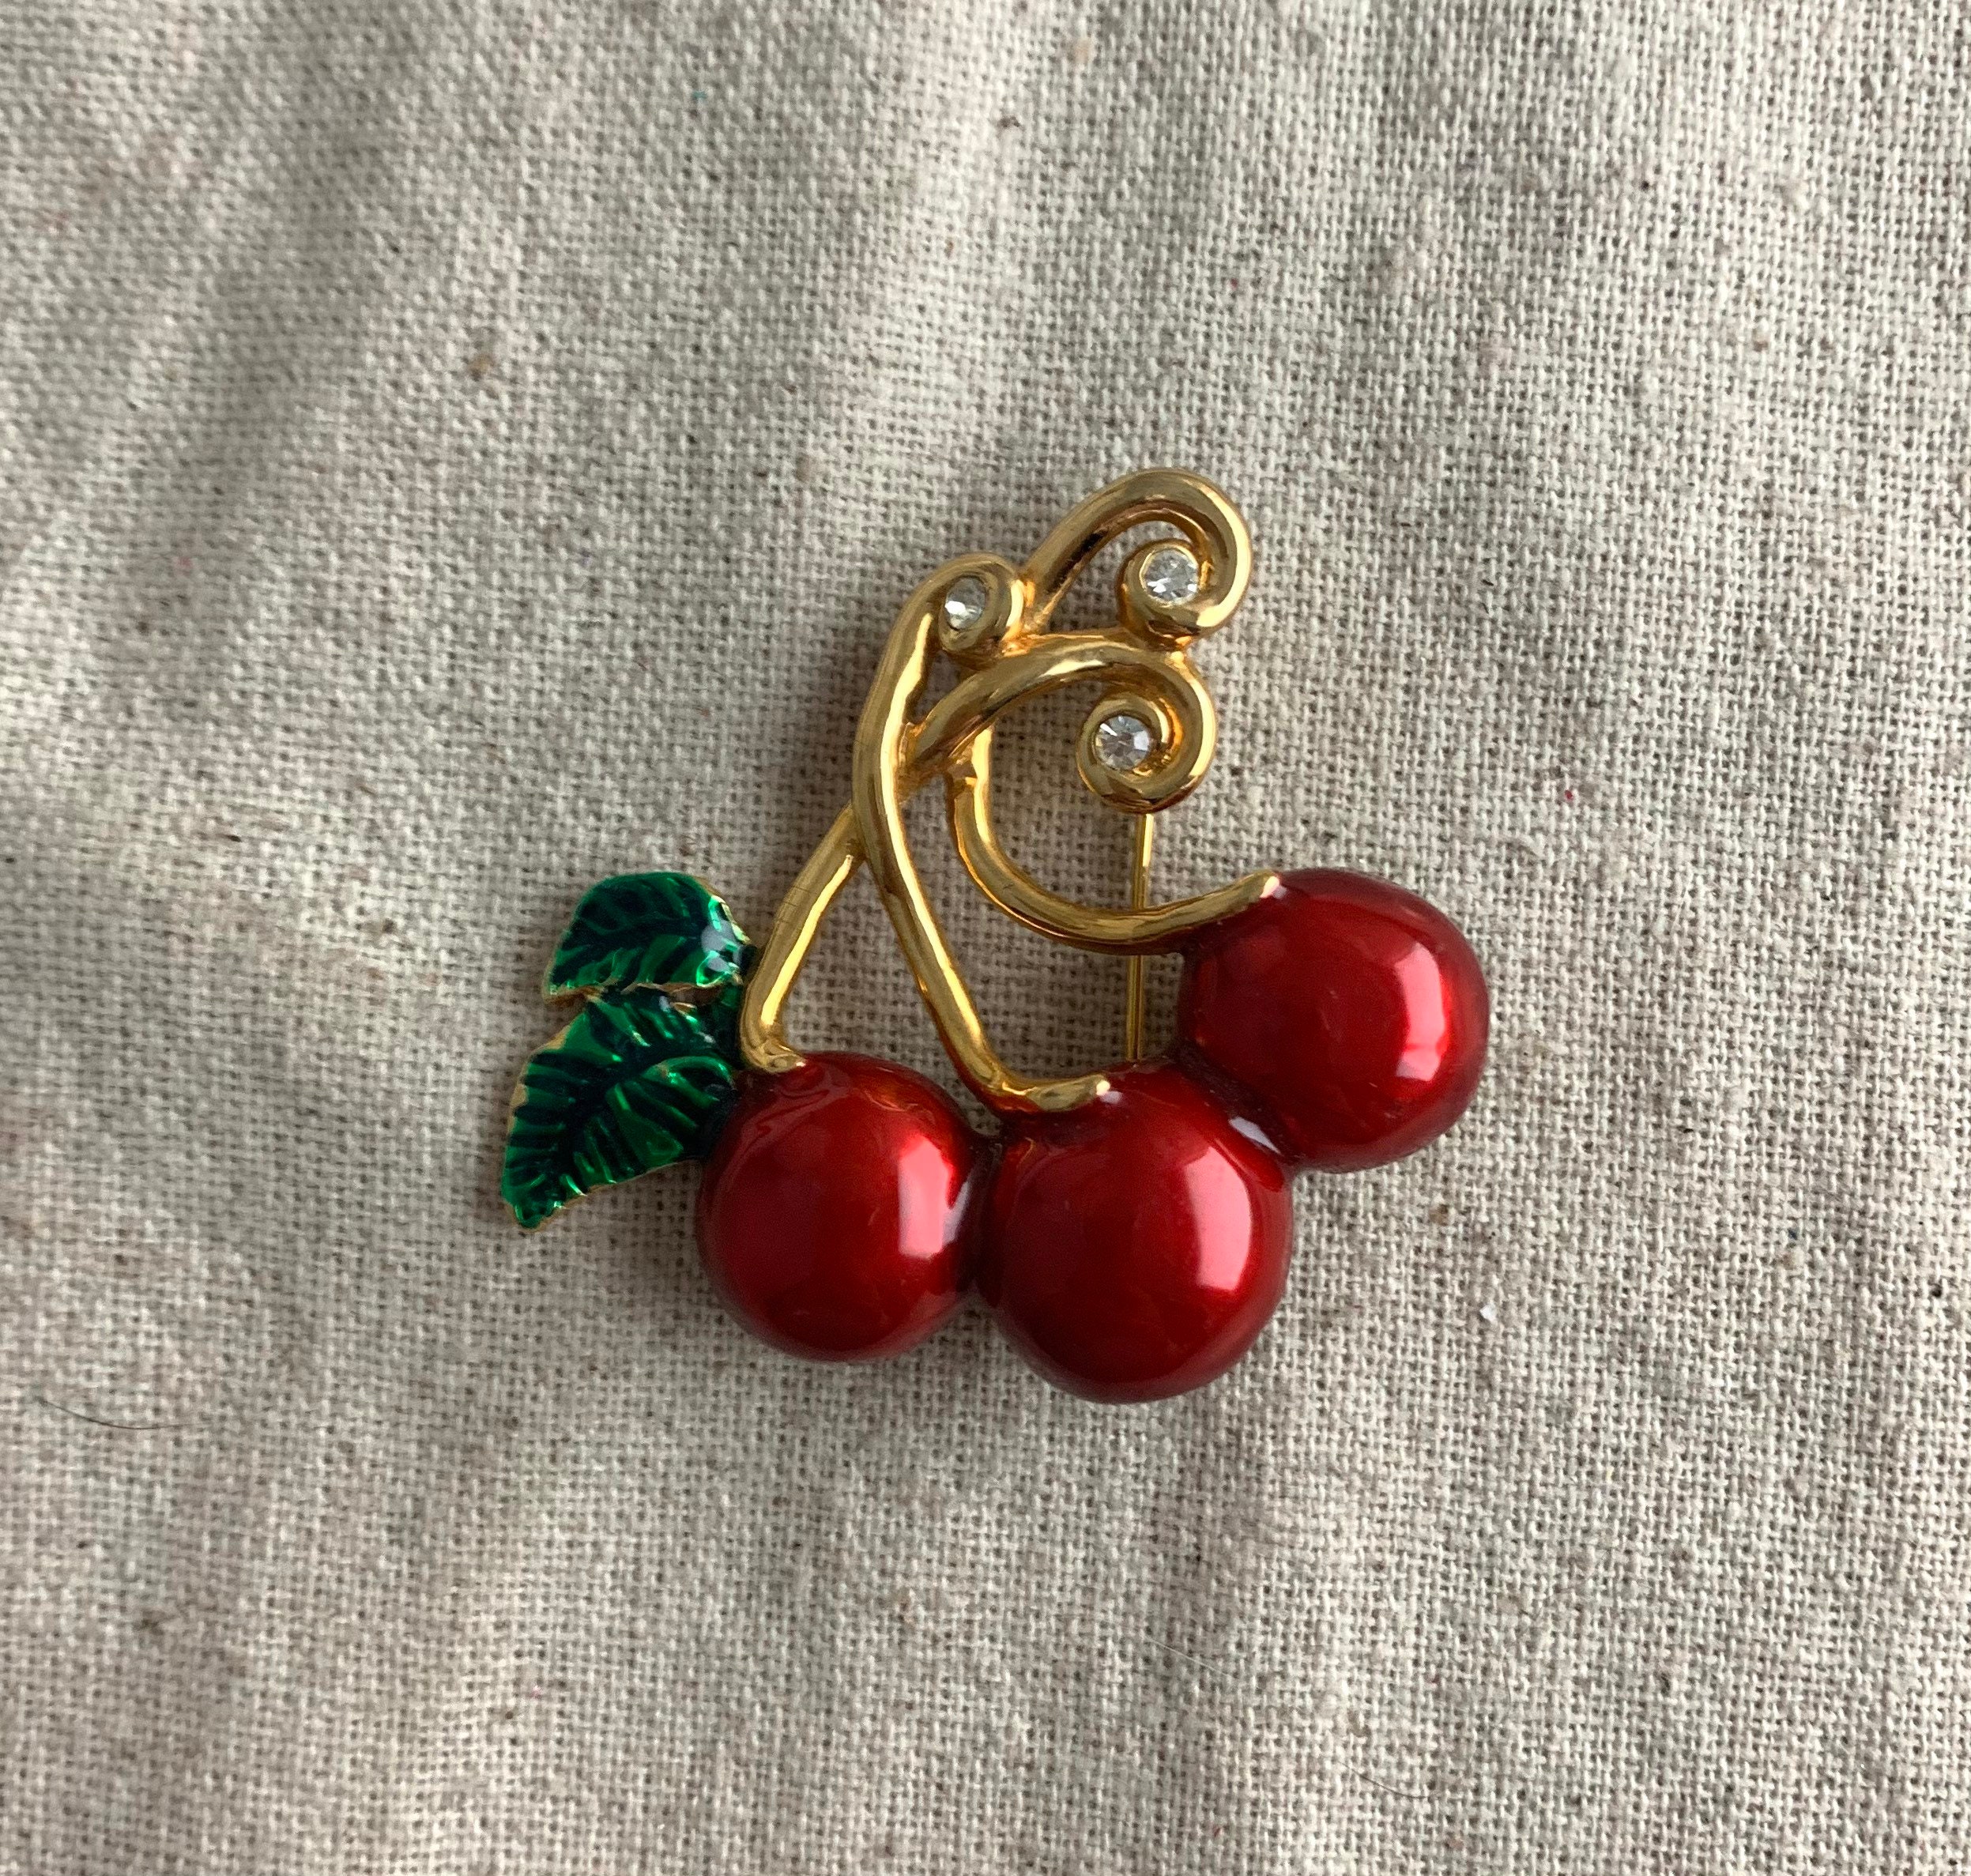 Stylish Pearl Cherry Brooch For Women 5 Unique Designs With Cherry